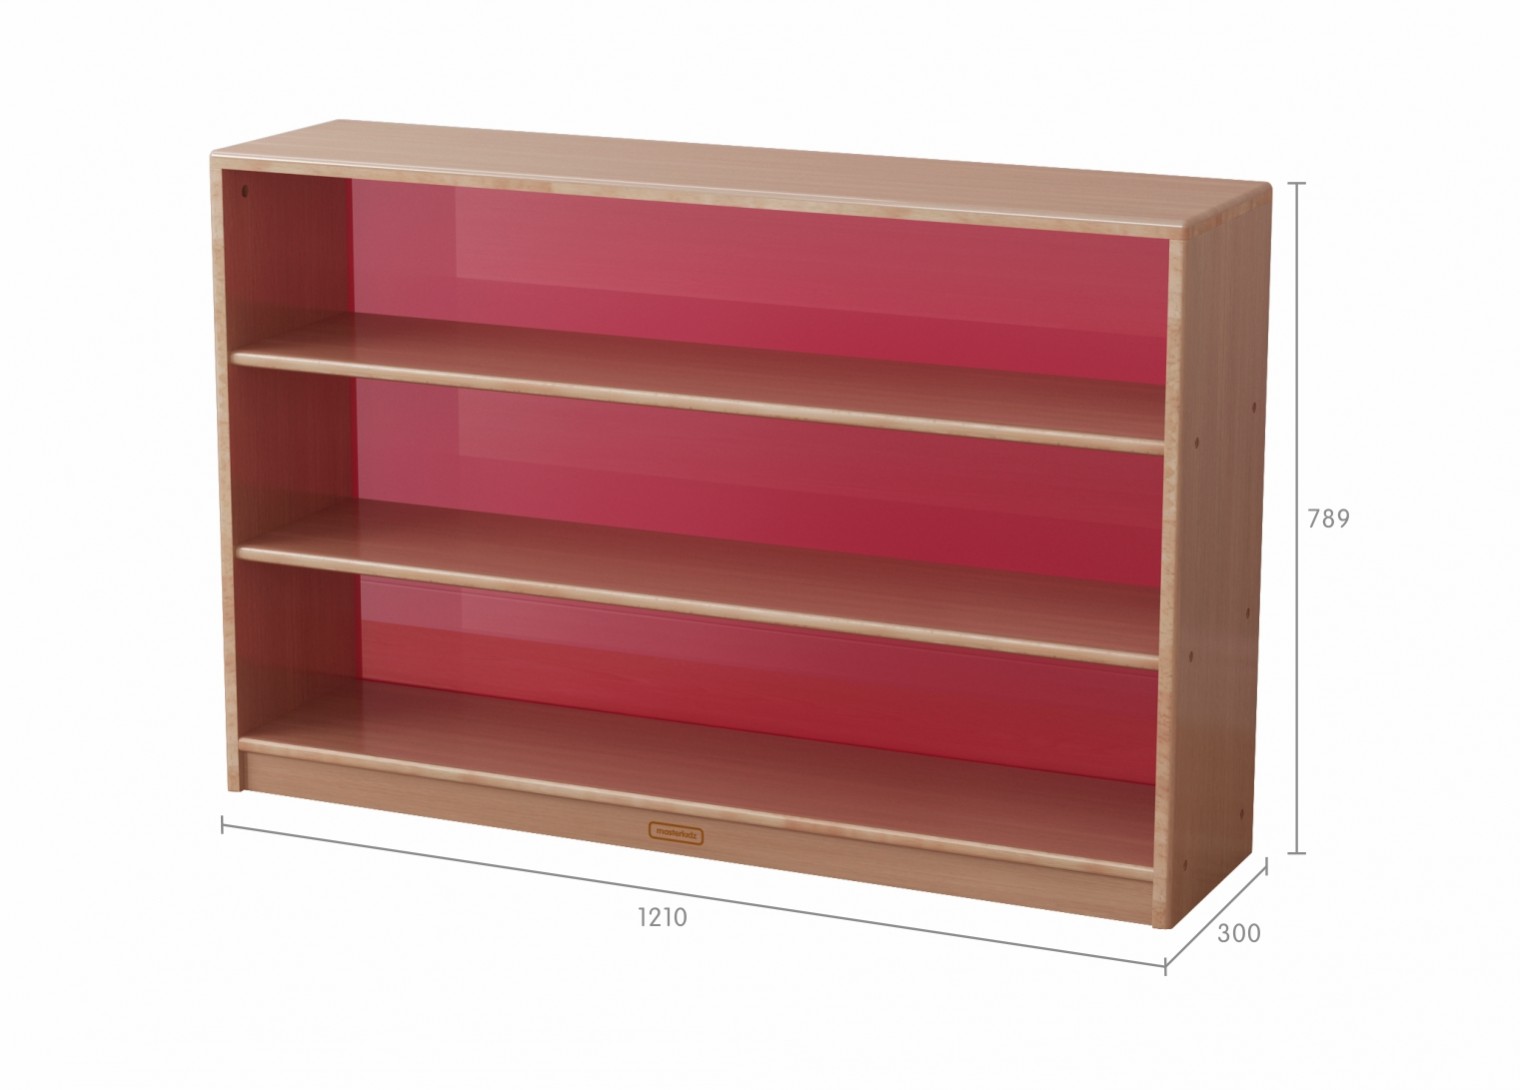 Forest School - 789H x 1210L Wooden  Shelving Unit - Translucent Red Back